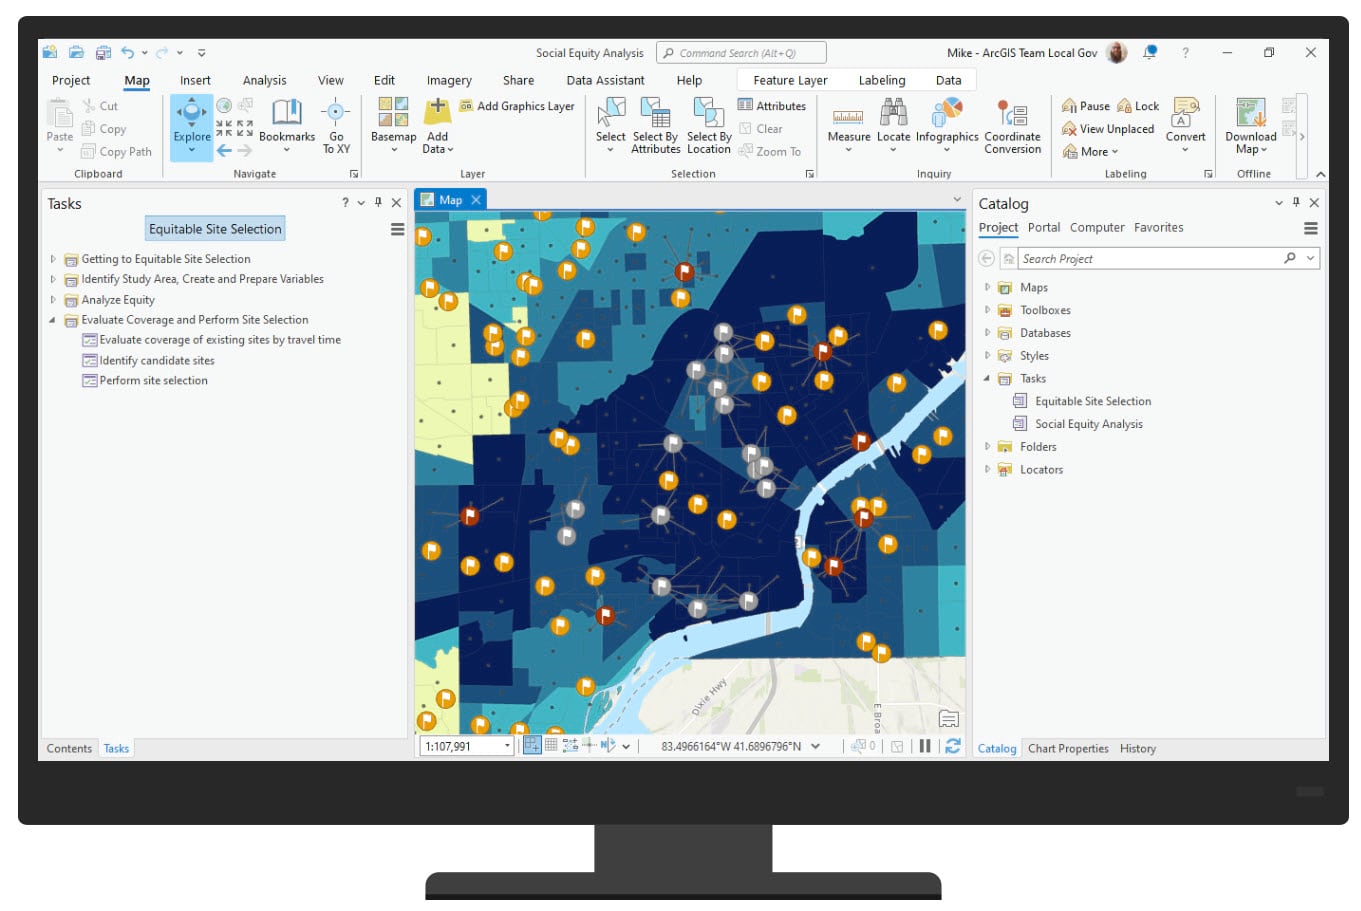 An image of the Social Equity Analysis ArcGIS Pro project with the Equitable Site Selection tasks open